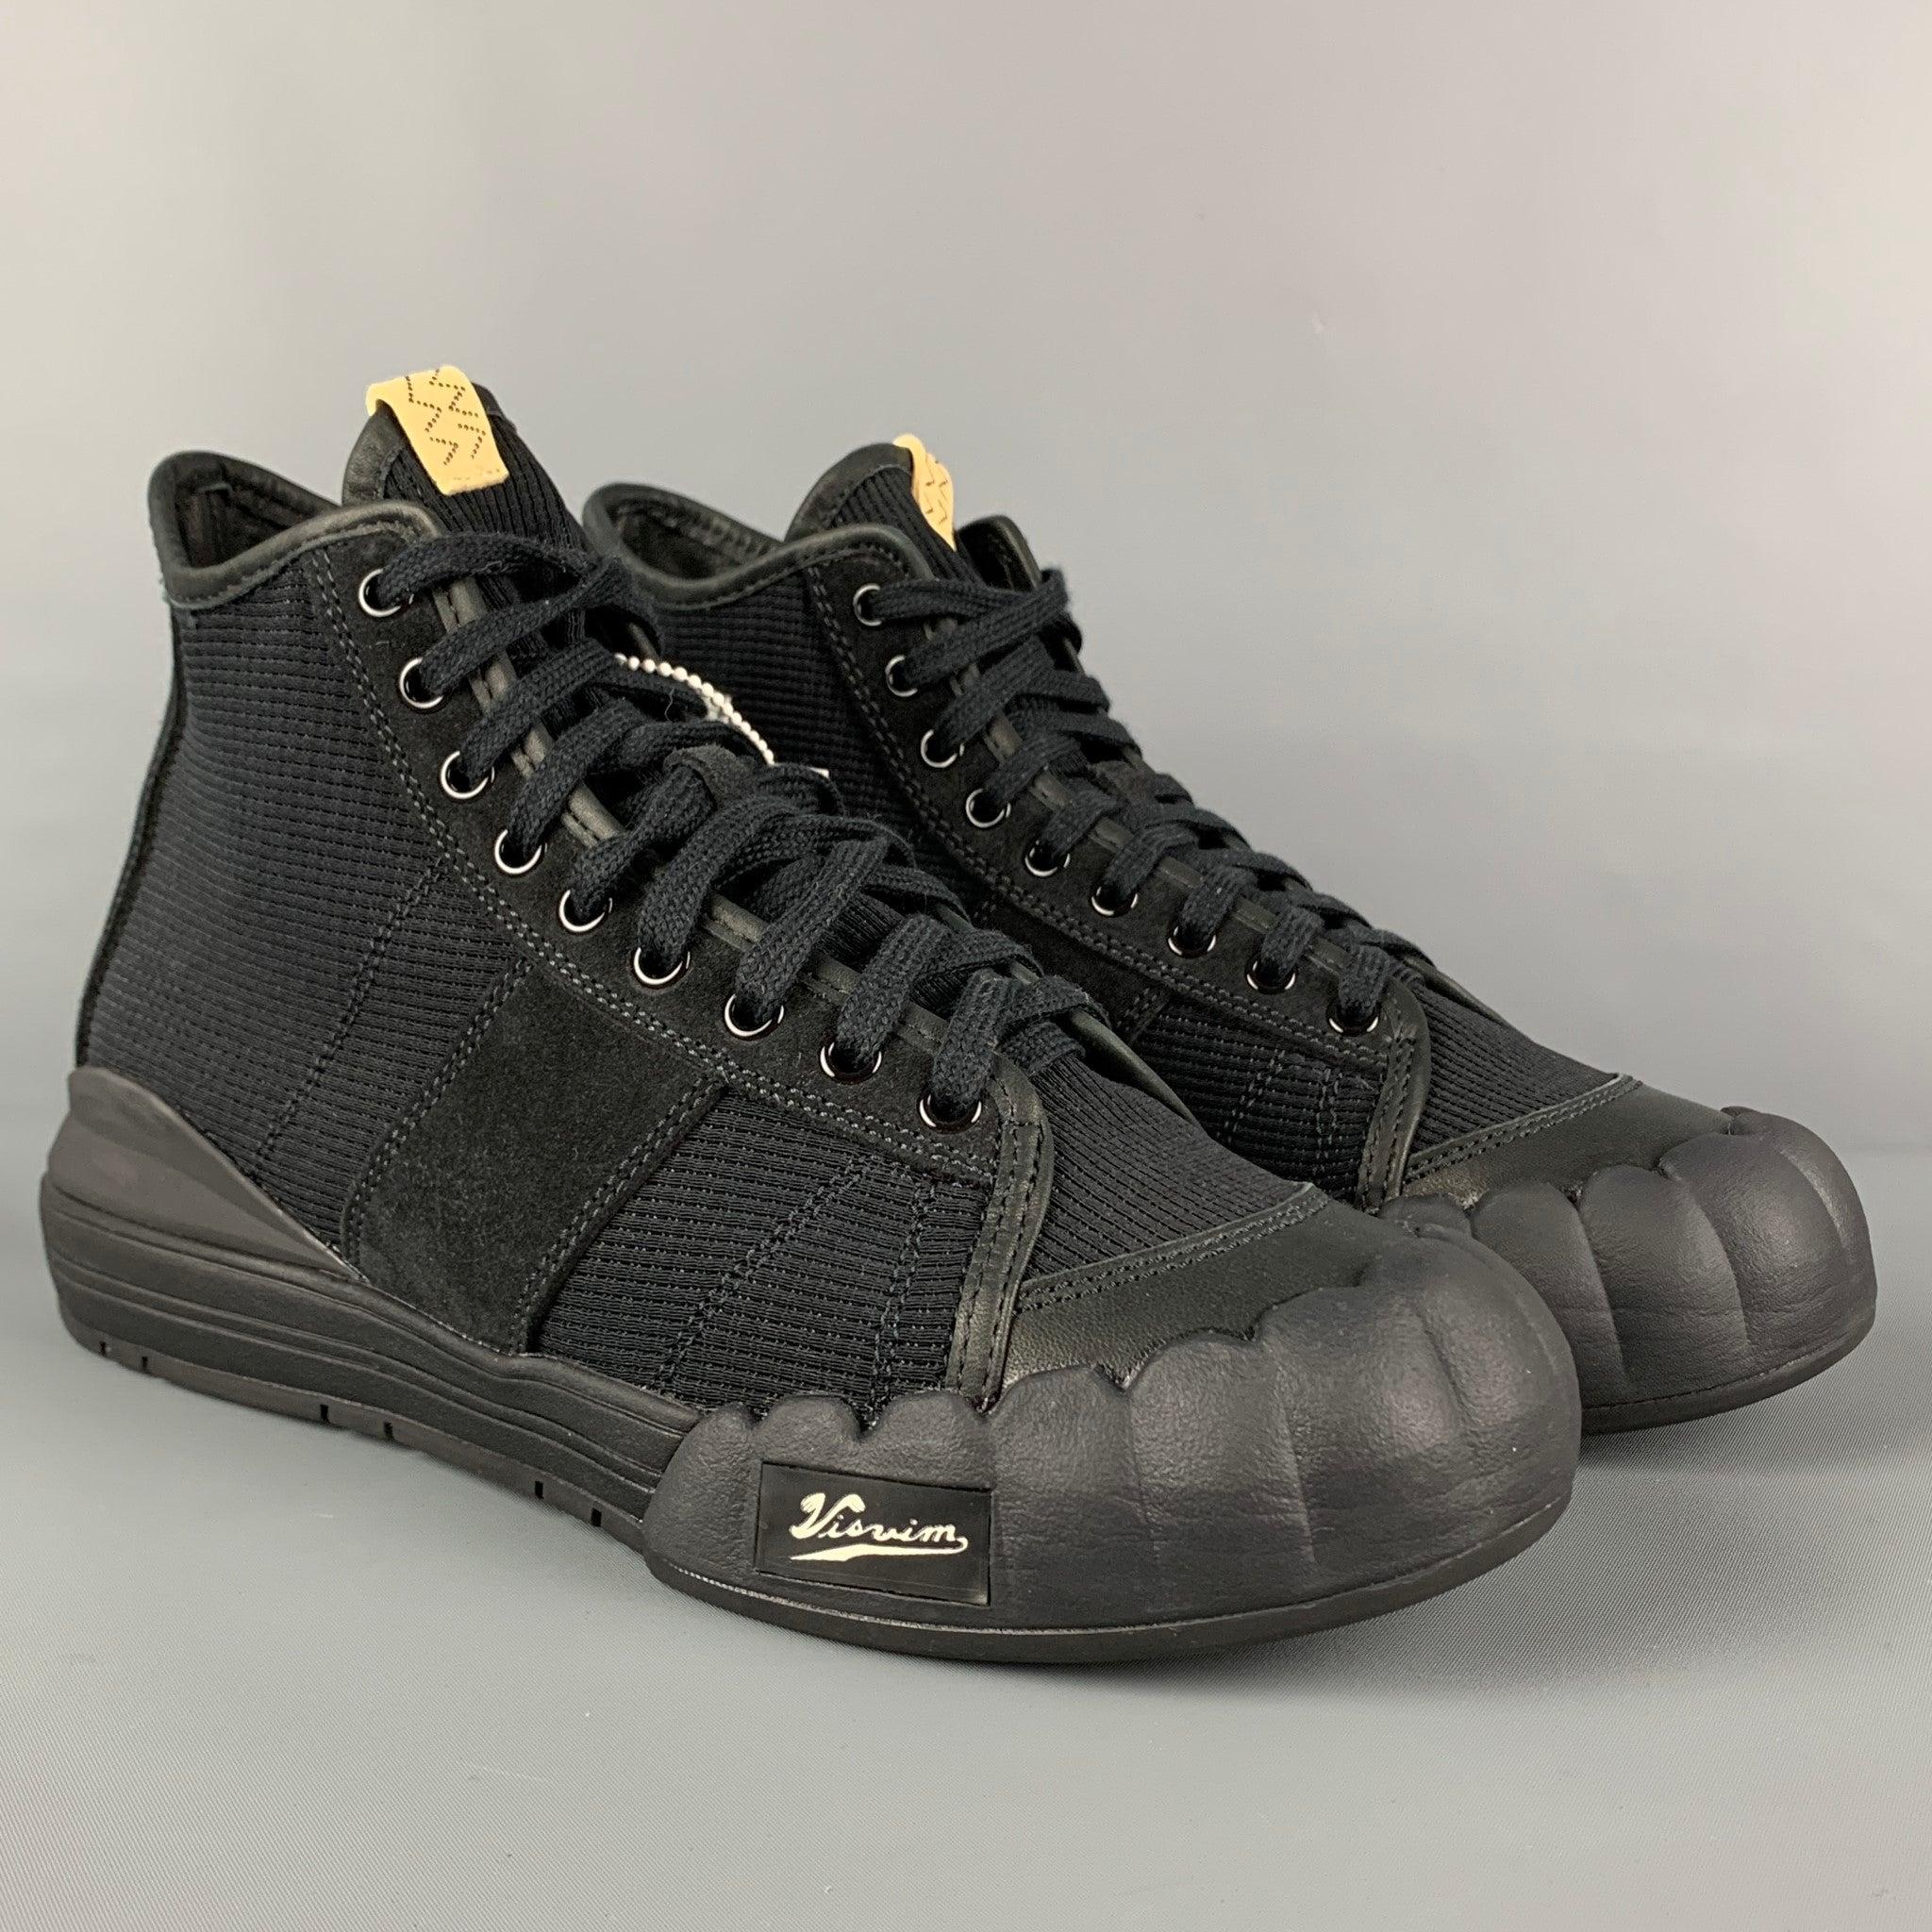 VISVIM 'Lanier' sneakers comes in a black paneled rib knit with a leather and suede trim throughout featuring a high-top style, rubberized to and heel, leather lining, and a lace up closure.
New With Box.
 

Marked:   10.5Outsole: 12 inches  x 4